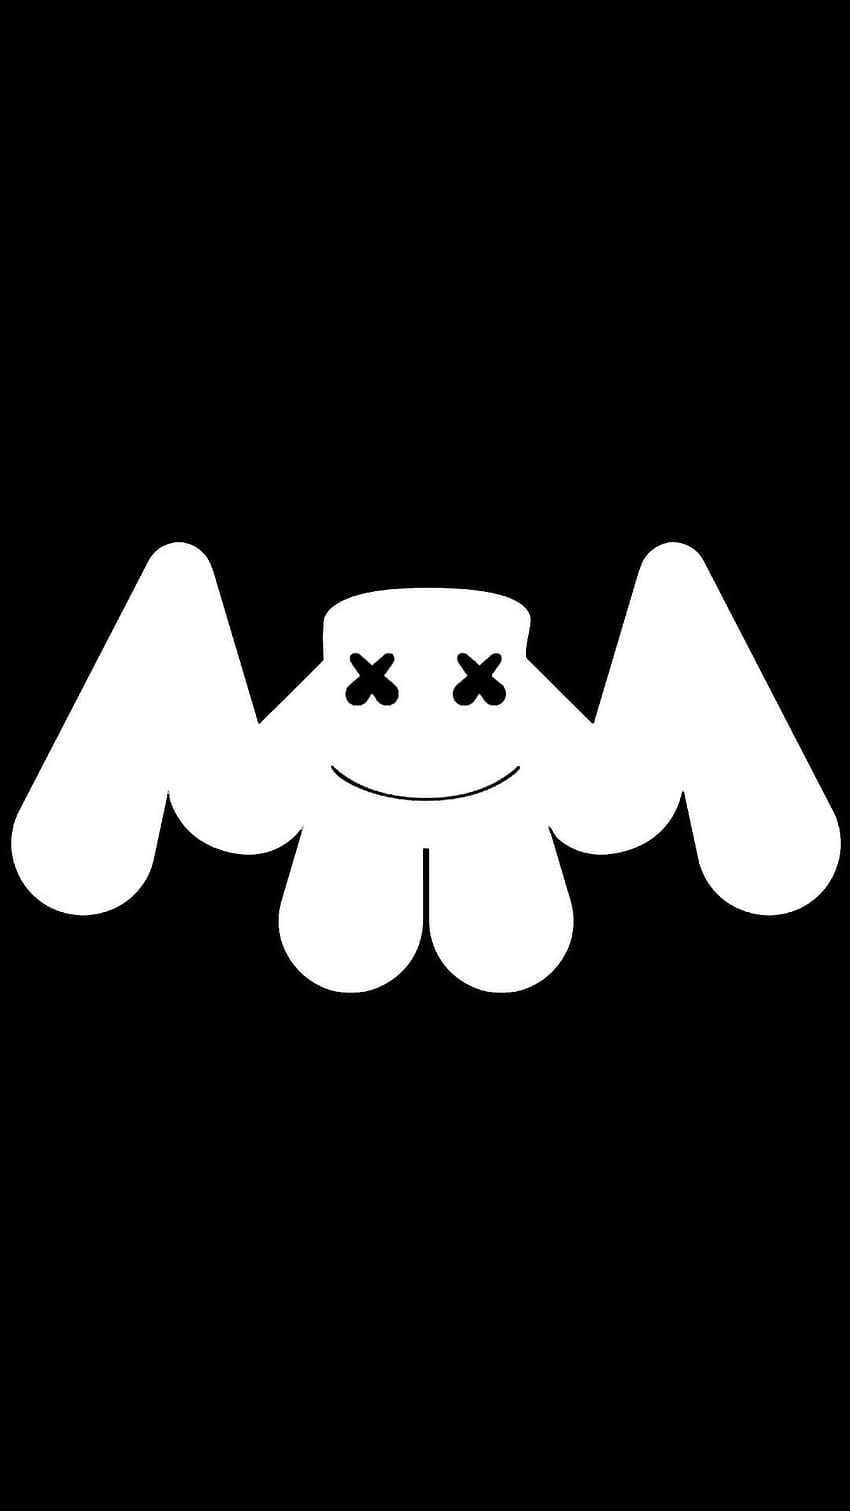 Marshmello &#8211; keep it Mello • Also buy this artwork on stickers,  apparel, phone cases, and more. | Music stickers, T shirt yarn, Stickers